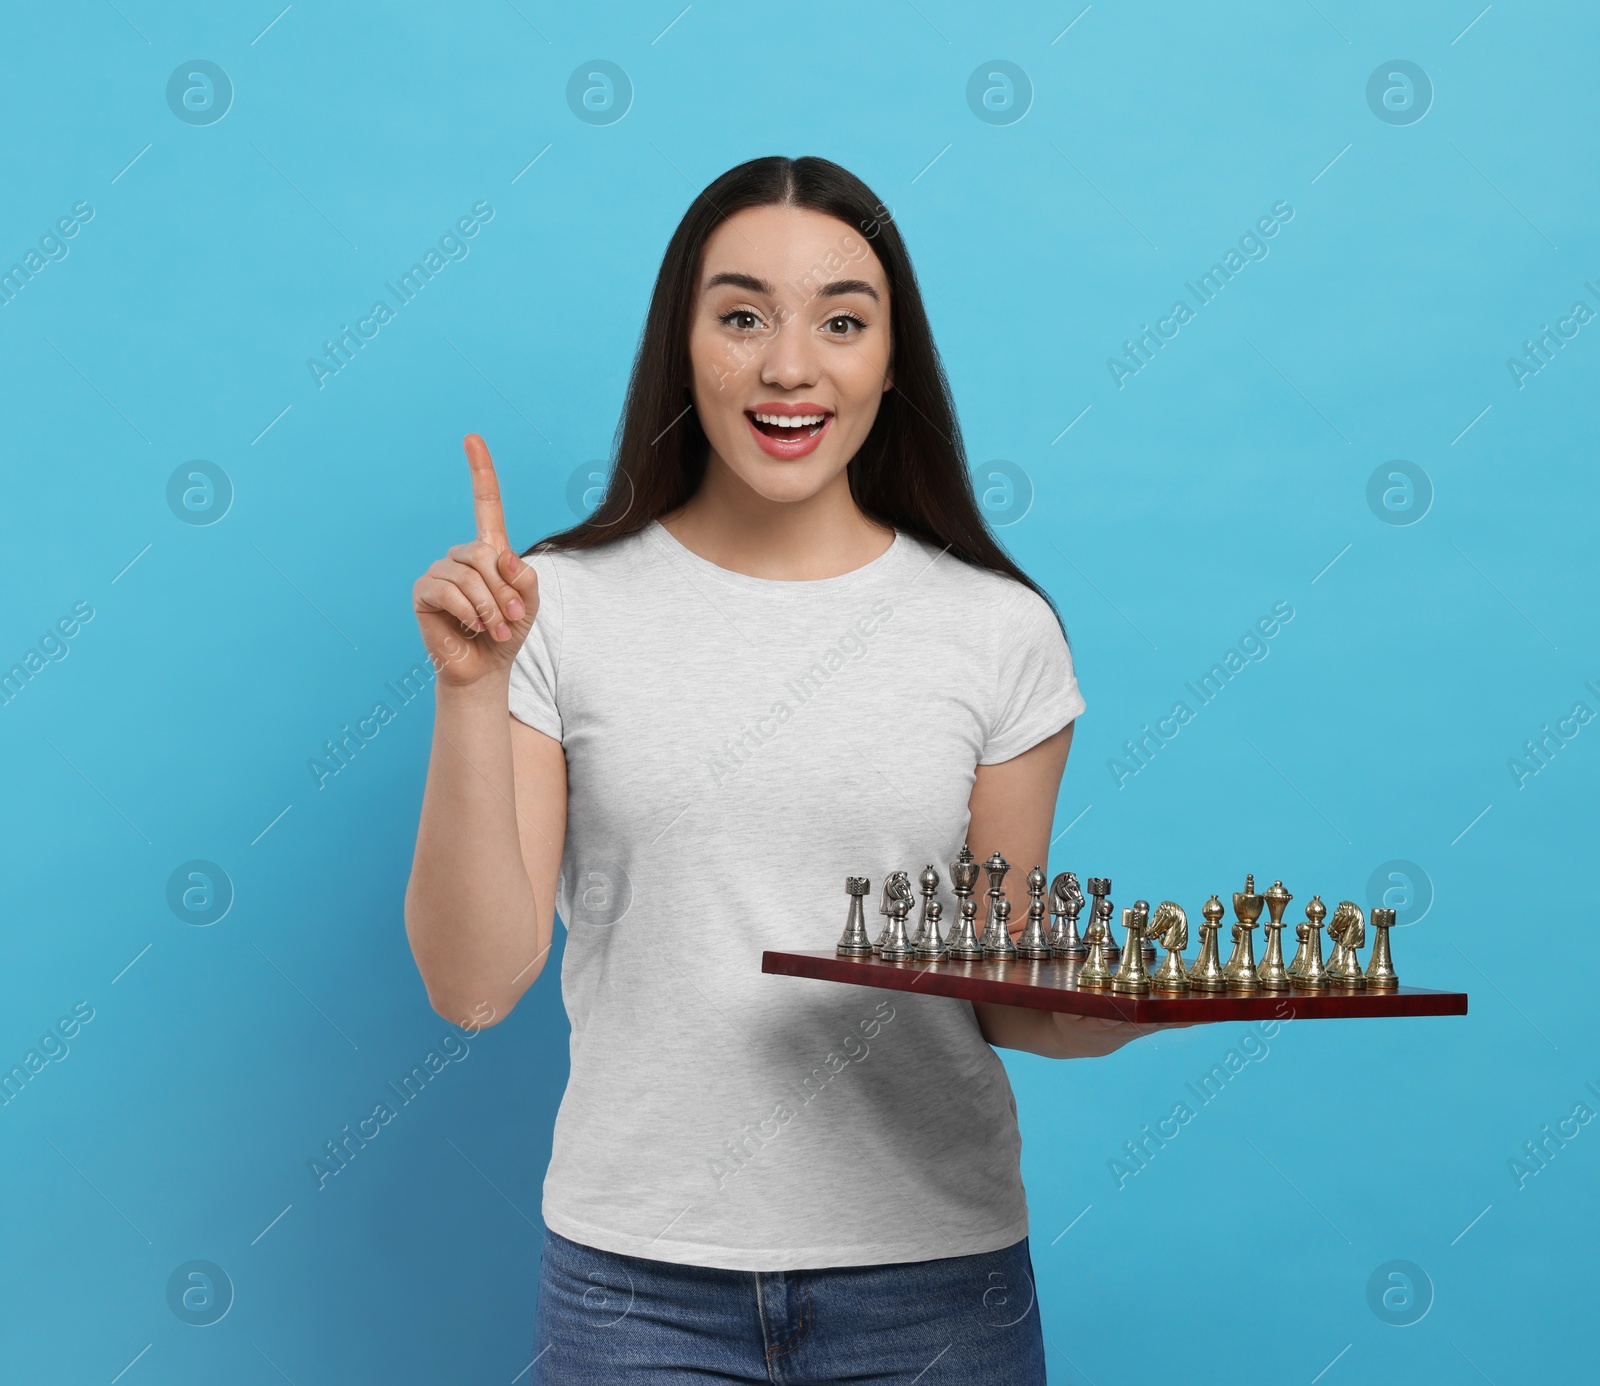 Photo of Happy woman with chessboard pointing upwards on light blue background